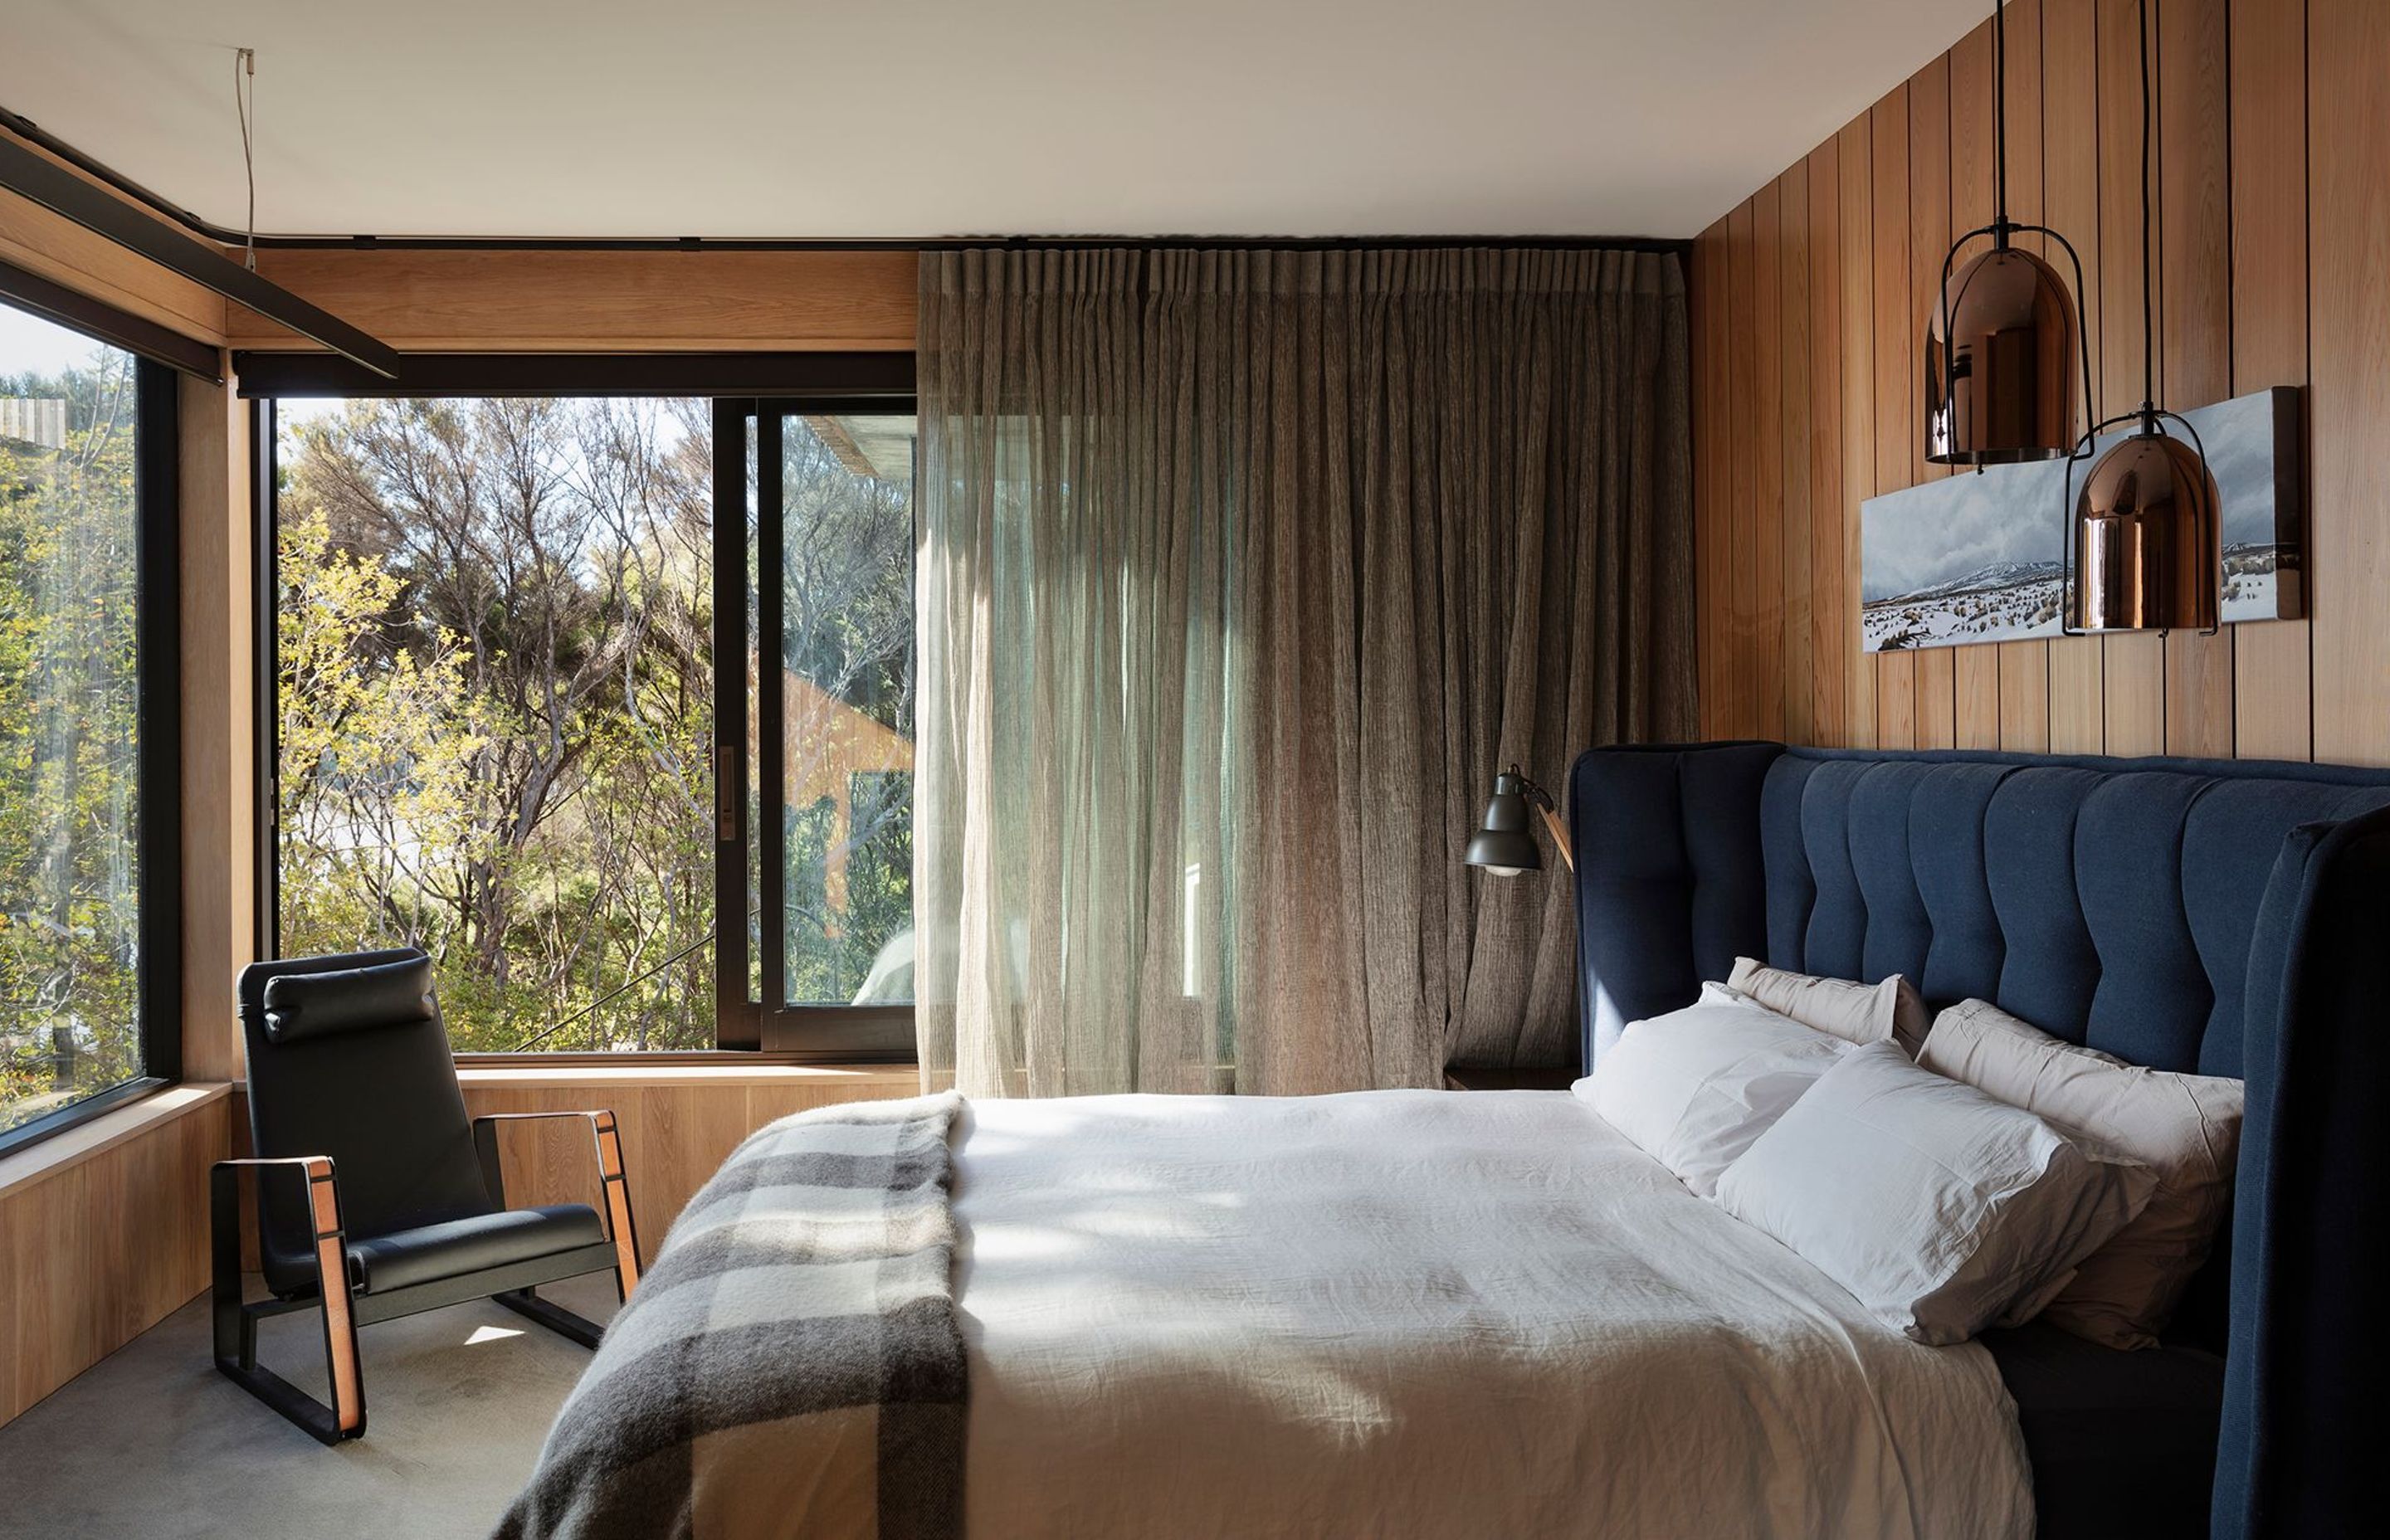 The bedroom is lined with timber panelling and enjoys views over the bush through large windows.